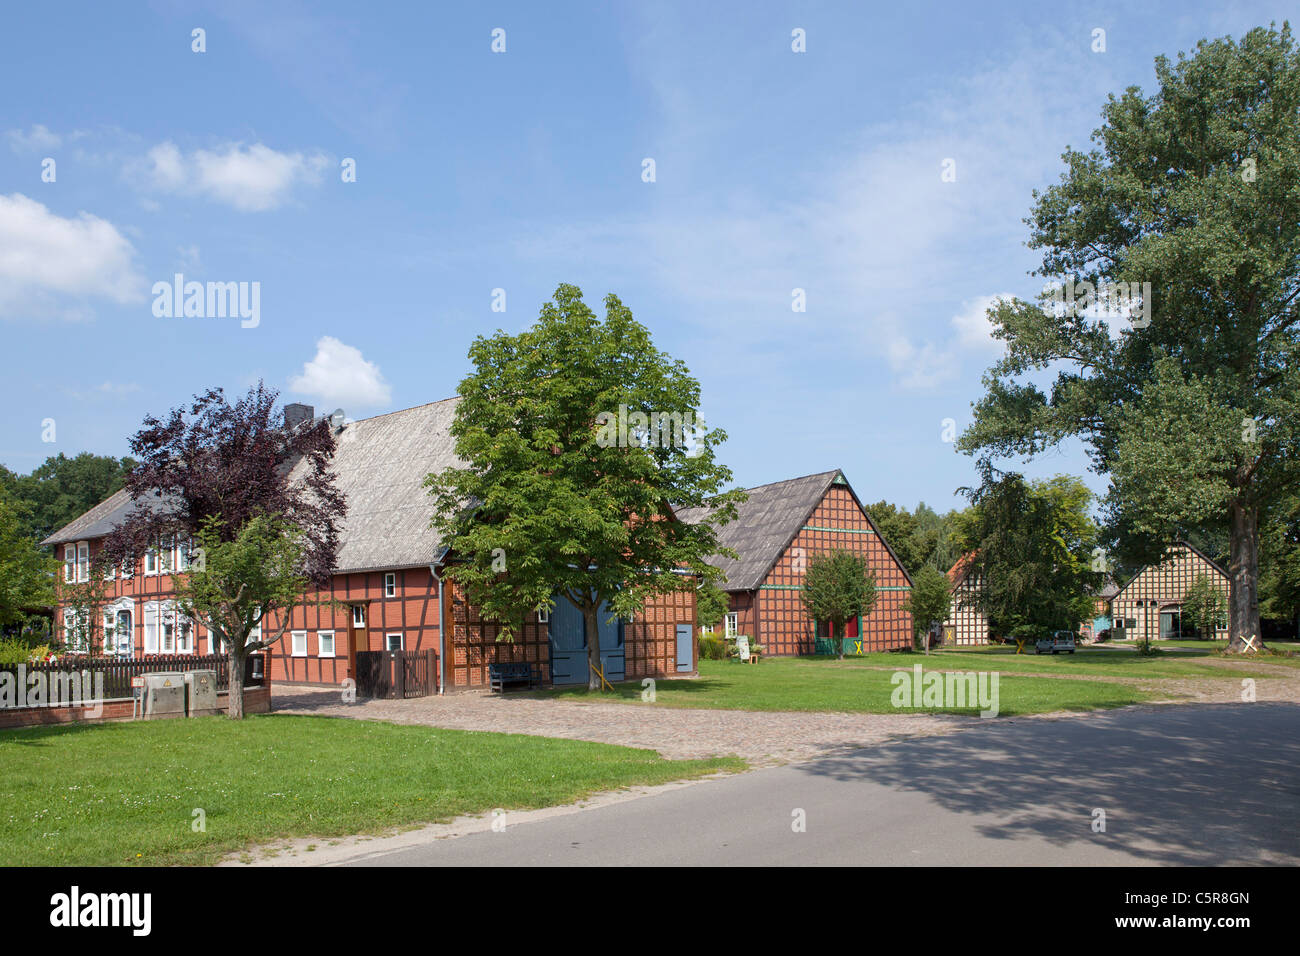 half-timbered houses in the round village Satemin, Wendland, Lower Saxony, Germany Stock Photo